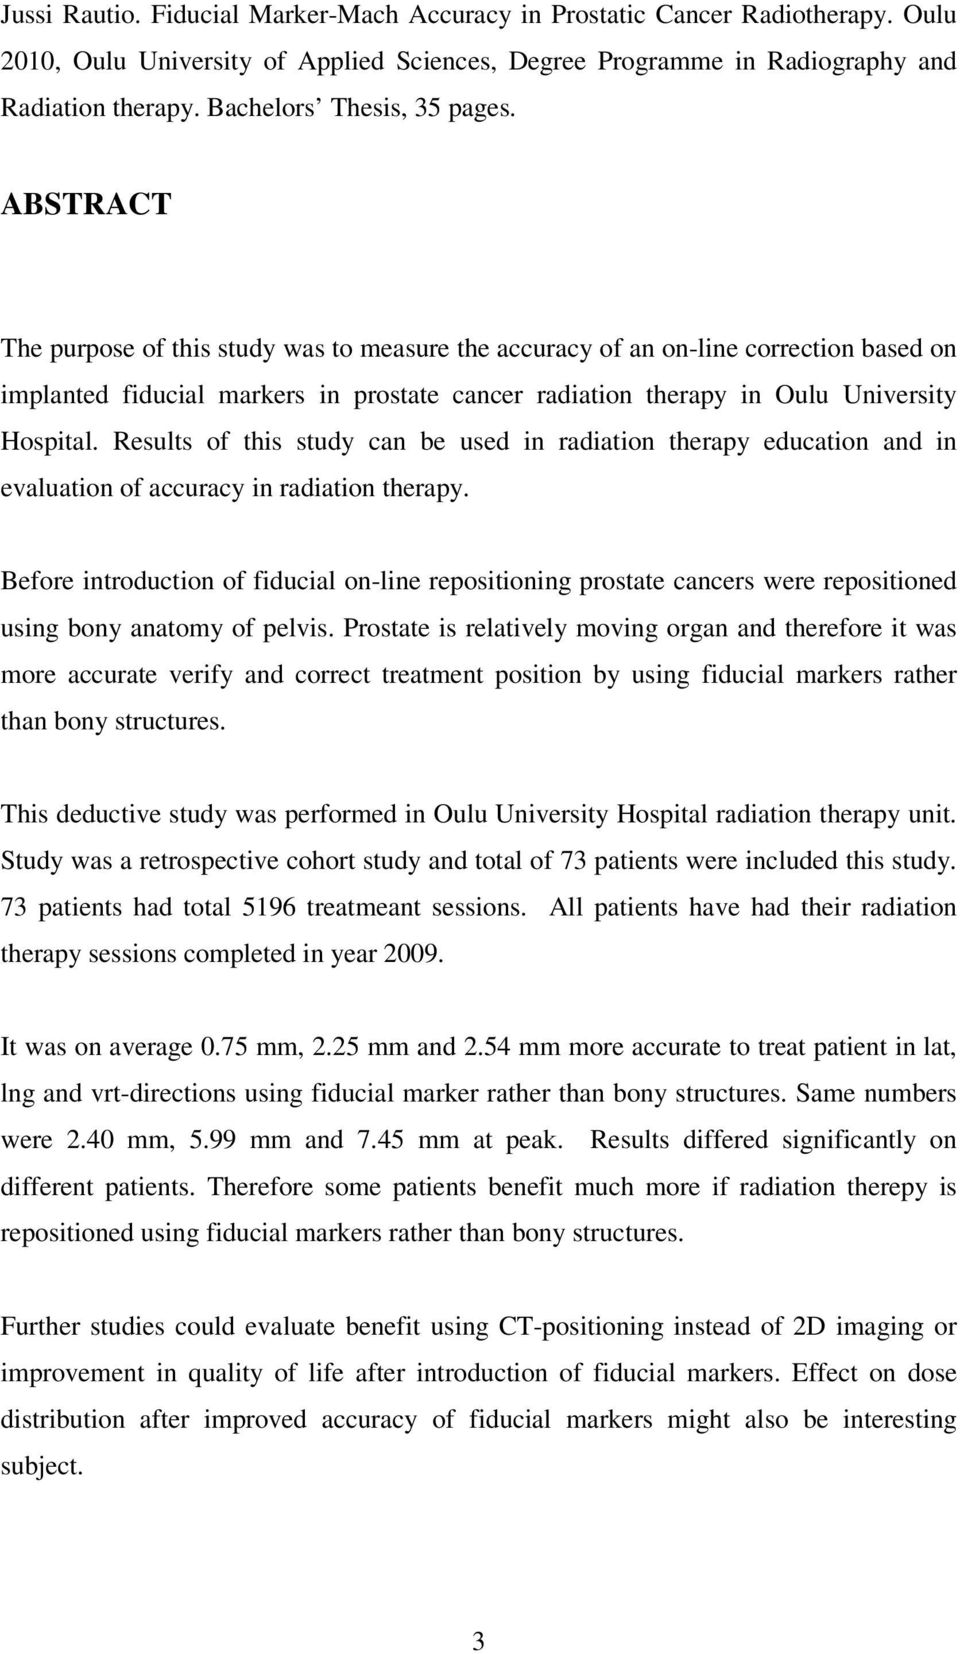 ABSTRACT The purpose of this study was to measure the accuracy of an on-line correction based on implanted fiducial markers in prostate cancer radiation therapy in Oulu University Hospital.